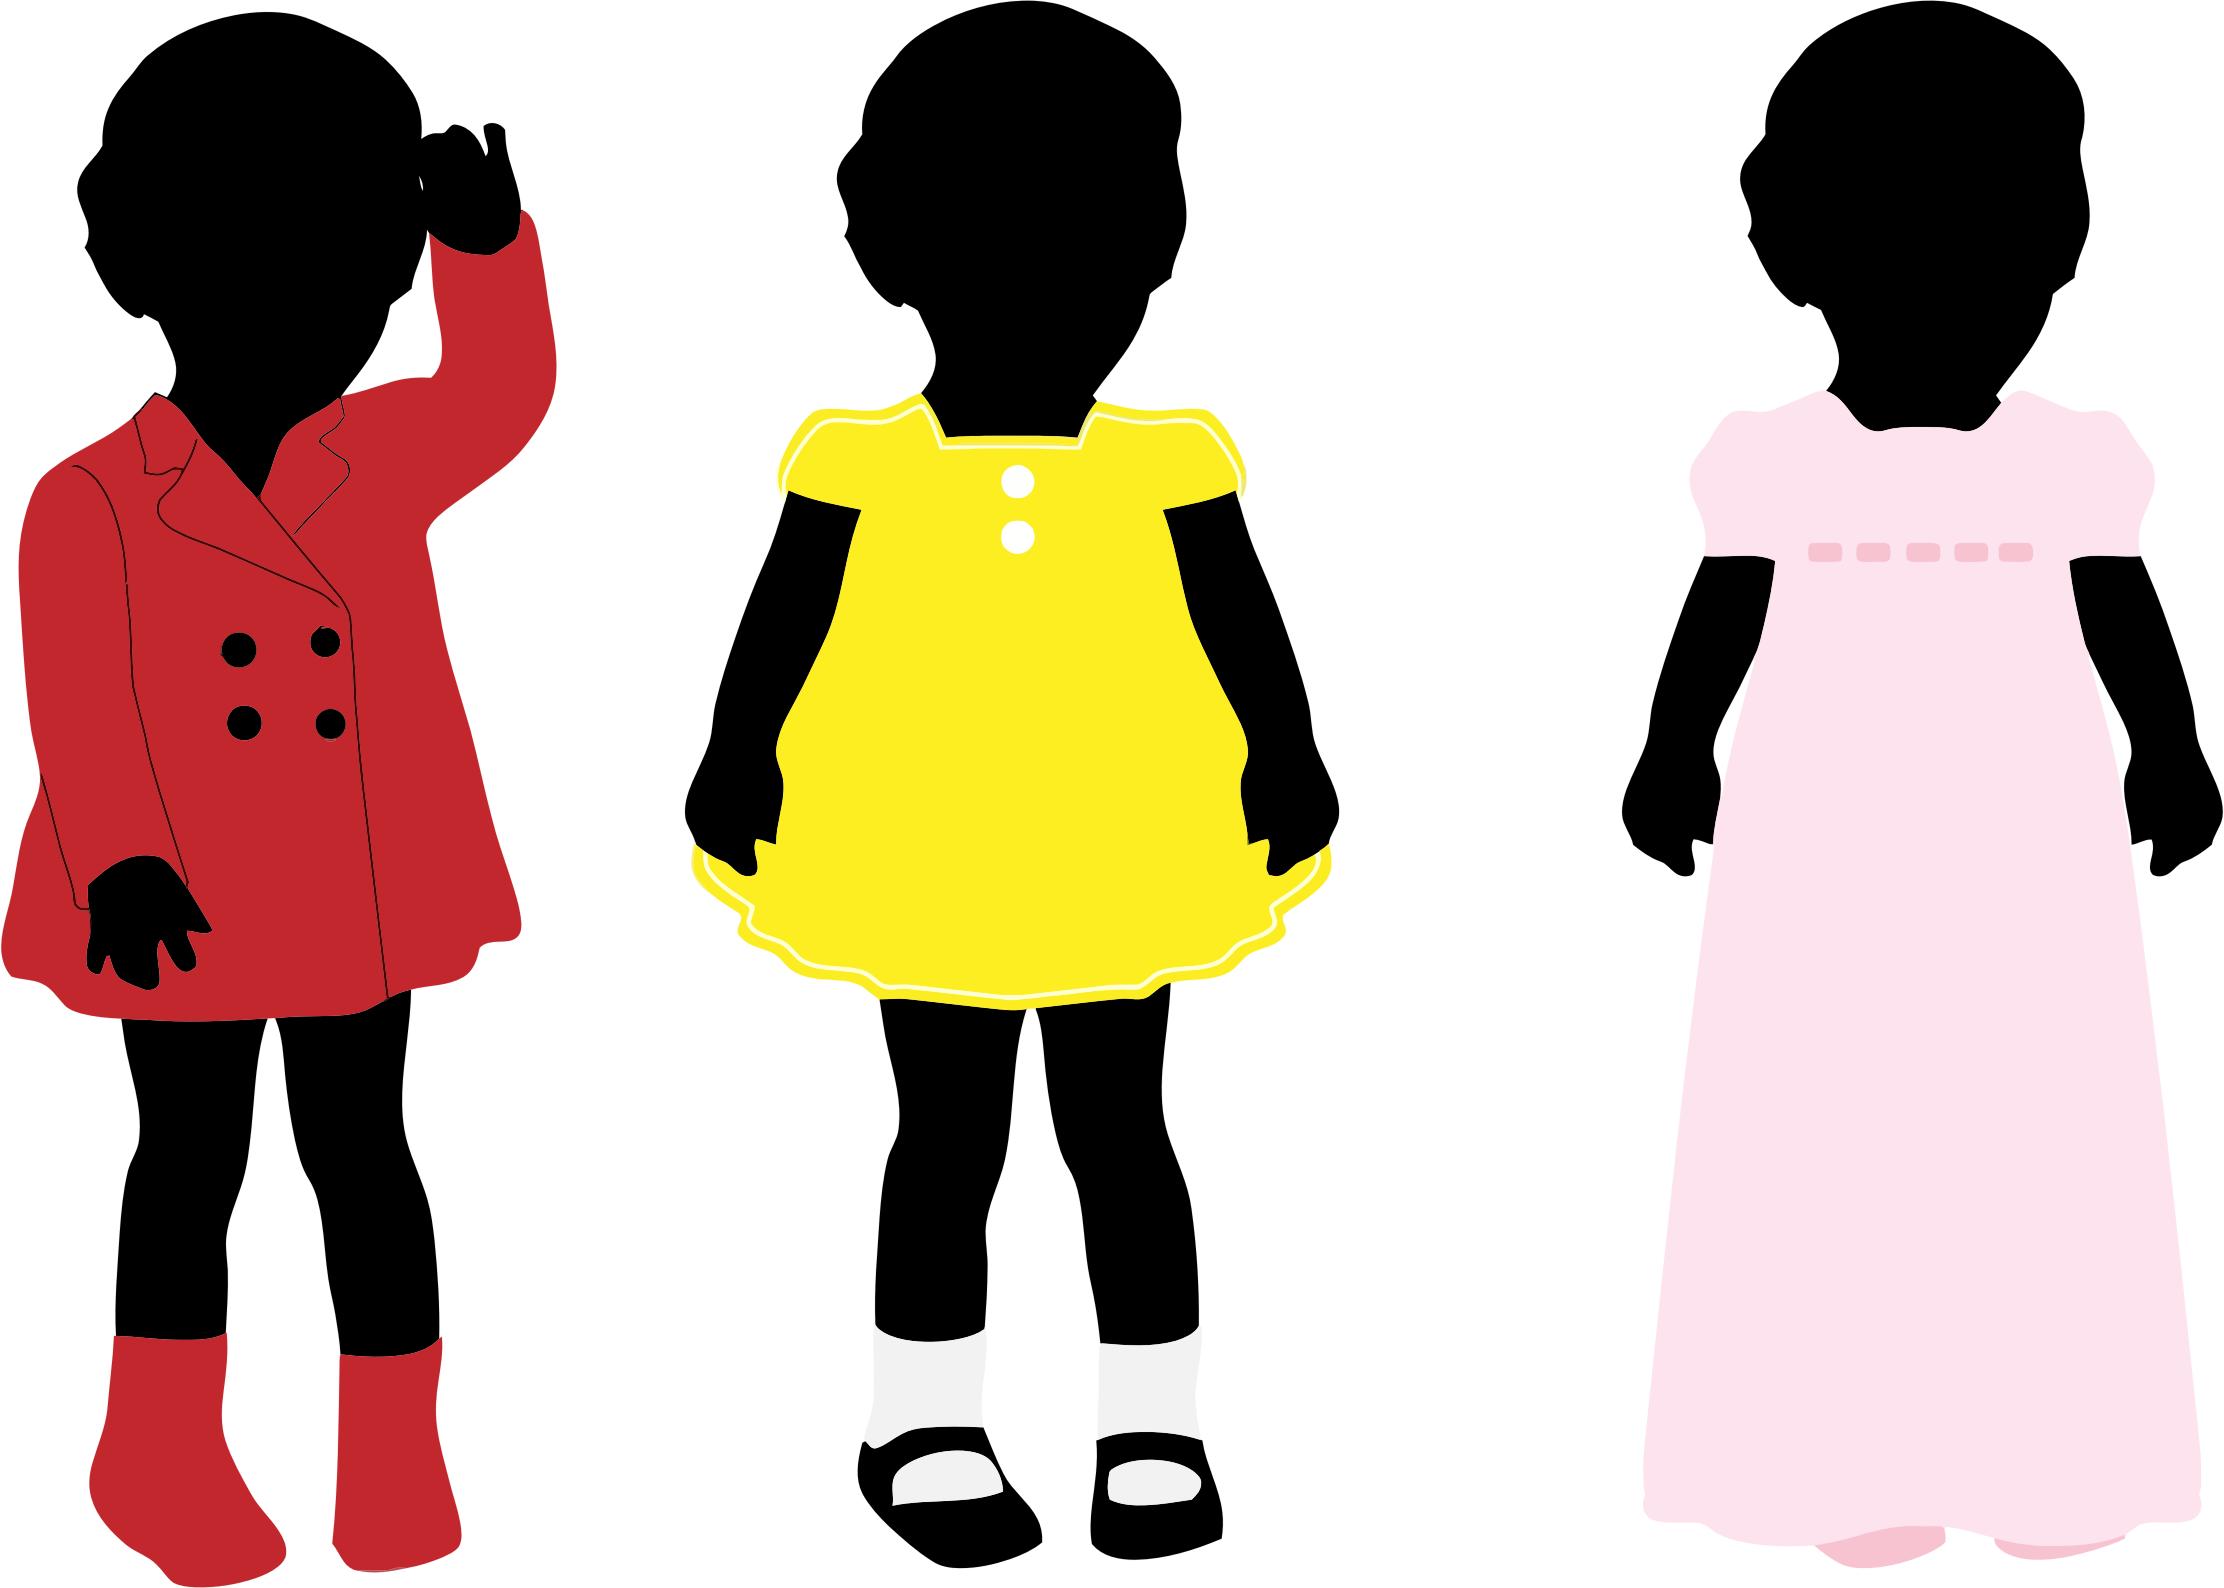 3 Girls Wearing Colorful Dresses Silhouette png